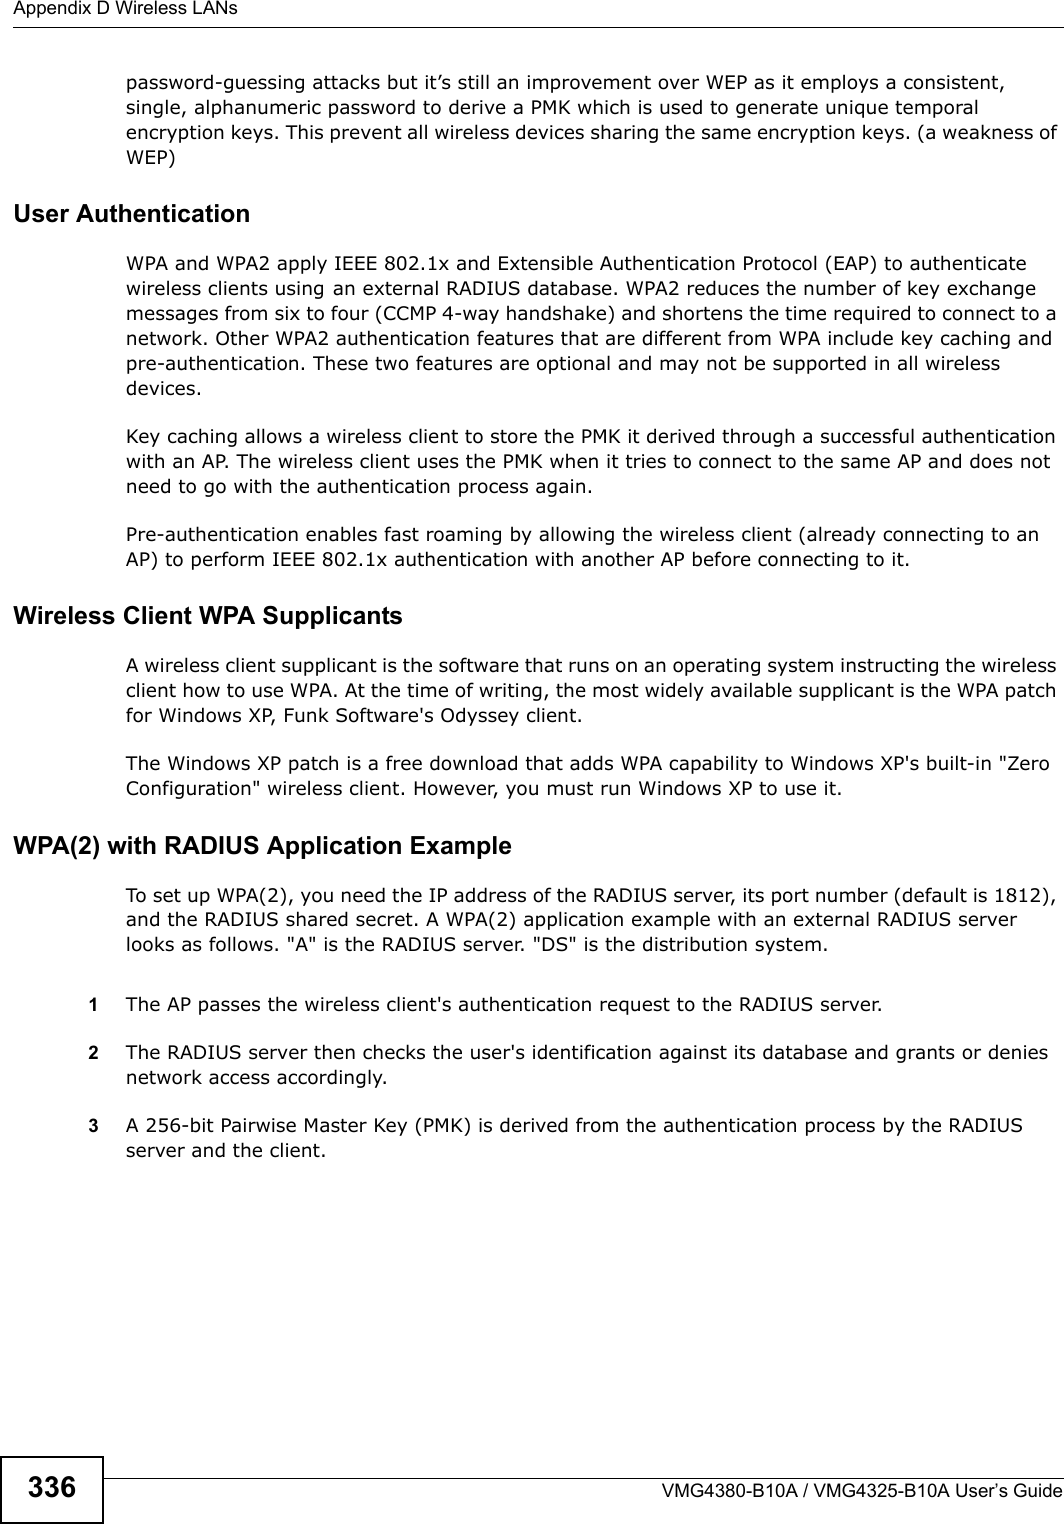 Appendix D Wireless LANsVMG4380-B10A / VMG4325-B10A User’s Guide336password-guessing attacks but it’s still an improvement over WEP as it employs a consistent, single, alphanumeric password to derive a PMK which is used to generate unique temporal encryption keys. This prevent all wireless devices sharing the same encryption keys. (a weakness of WEP)User Authentication WPA and WPA2 apply IEEE 802.1x and Extensible Authentication Protocol (EAP) to authenticate wireless clients using an external RADIUS database. WPA2 reduces the number of key exchangemessages from six to four (CCMP 4-way handshake) and shortens the time required to connect to a network. Other WPA2 authentication features that are different from WPA include key caching and pre-authentication. These two features are optional and may not be supported in all wireless devices.Key caching allows a wireless client to store the PMK it derived through a successful authentication with an AP. The wireless client uses the PMK when it tries to connect to the same AP and does not need to go with the authentication process again.Pre-authentication enables fast roaming by allowing the wireless client (already connecting to an AP) to perform IEEE 802.1x authentication with another AP before connecting to it.Wireless Client WPA SupplicantsA wireless client supplicant is the software that runs on an operating system instructing the wireless client how to use WPA. At the time of writing, the most widely available supplicant is the WPA patch for Windows XP, Funk Software&apos;s Odyssey client. The Windows XP patch is a free download that adds WPA capability to Windows XP&apos;s built-in &quot;Zero Configuration&quot; wireless client. However, you must run Windows XP to use it. WPA(2) with RADIUS Application ExampleTo set up WPA(2), you need the IP address of the RADIUS server, its port number (default is 1812), and the RADIUS shared secret. A WPA(2) application example with an external RADIUS server looks as follows. &quot;A&quot; is the RADIUS server. &quot;DS&quot; is the distribution system.1The AP passes the wireless client&apos;s authentication request to the RADIUS server.2The RADIUS server then checks the user&apos;s identification against its database and grants or denies network access accordingly.3A 256-bit Pairwise Master Key (PMK) is derived from the authentication process by the RADIUS server and the client.